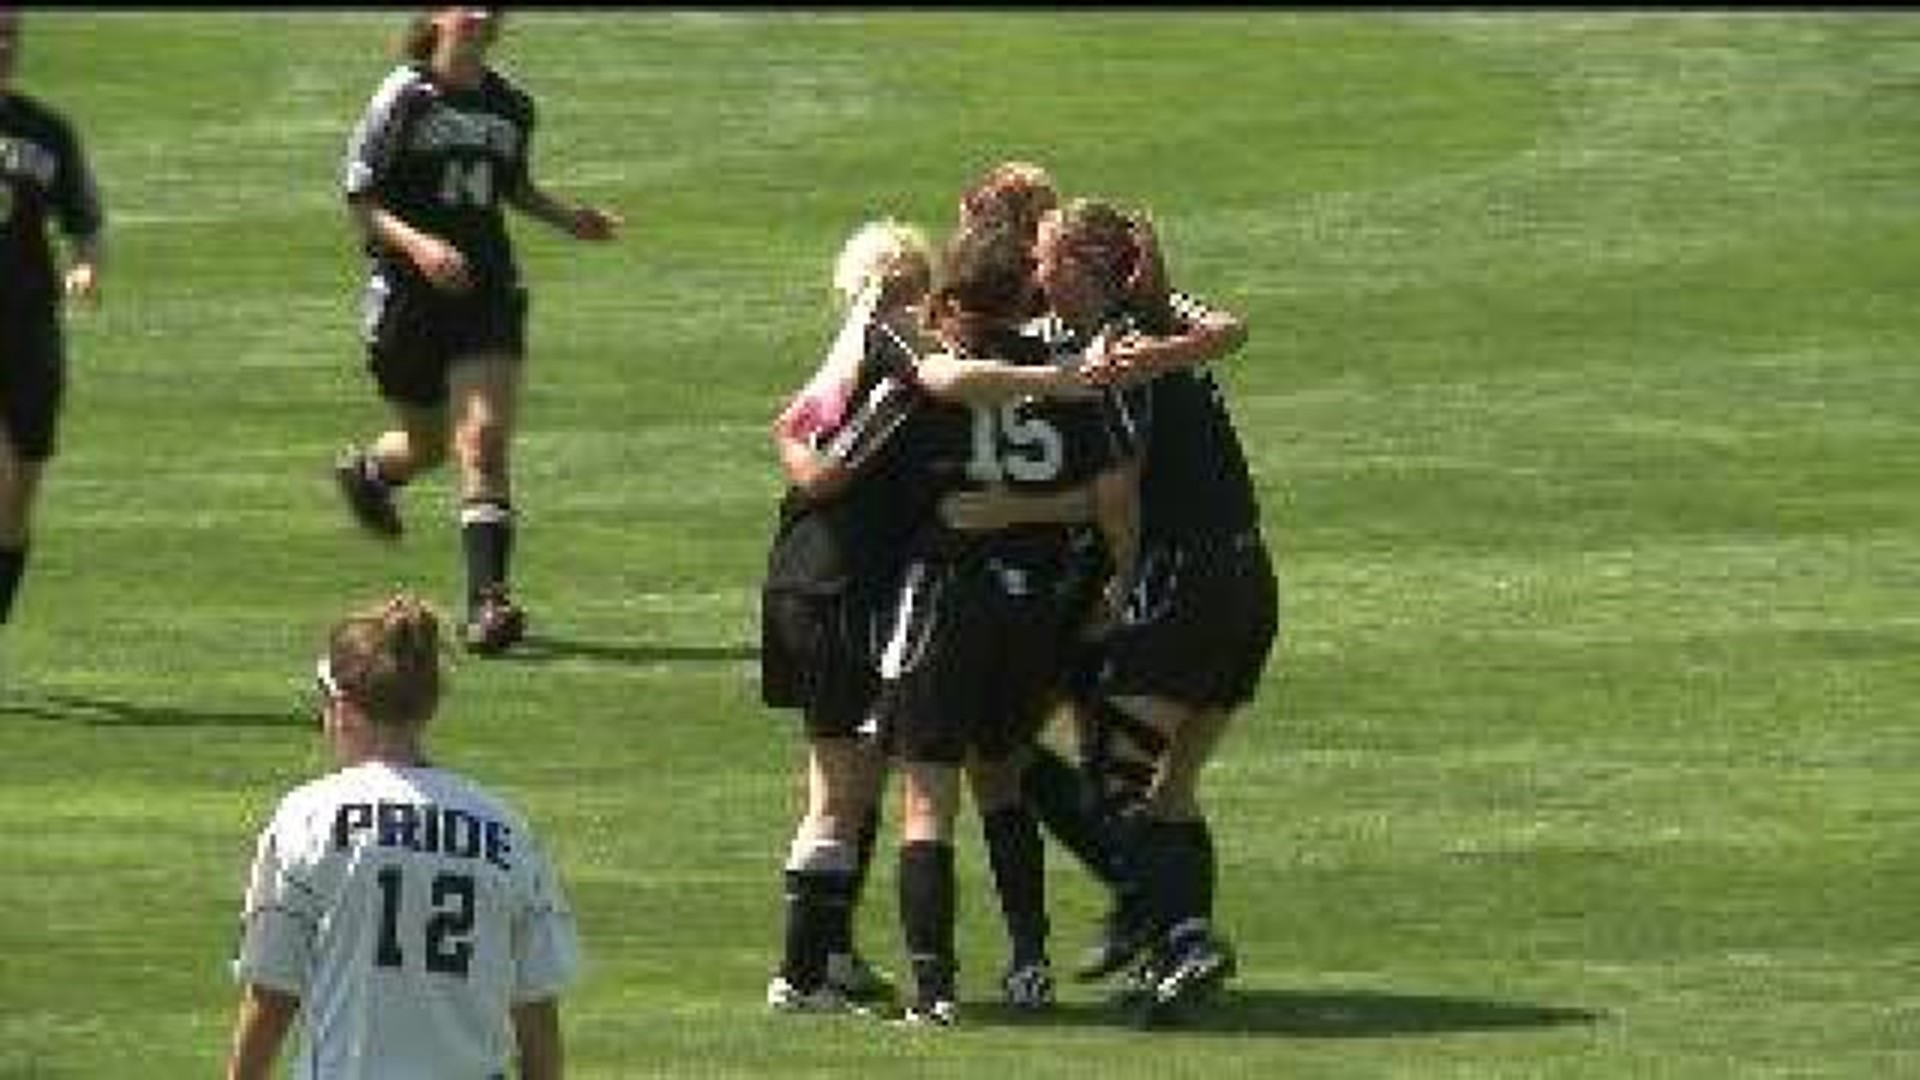 More Assumption Honors; State Soccer on Move